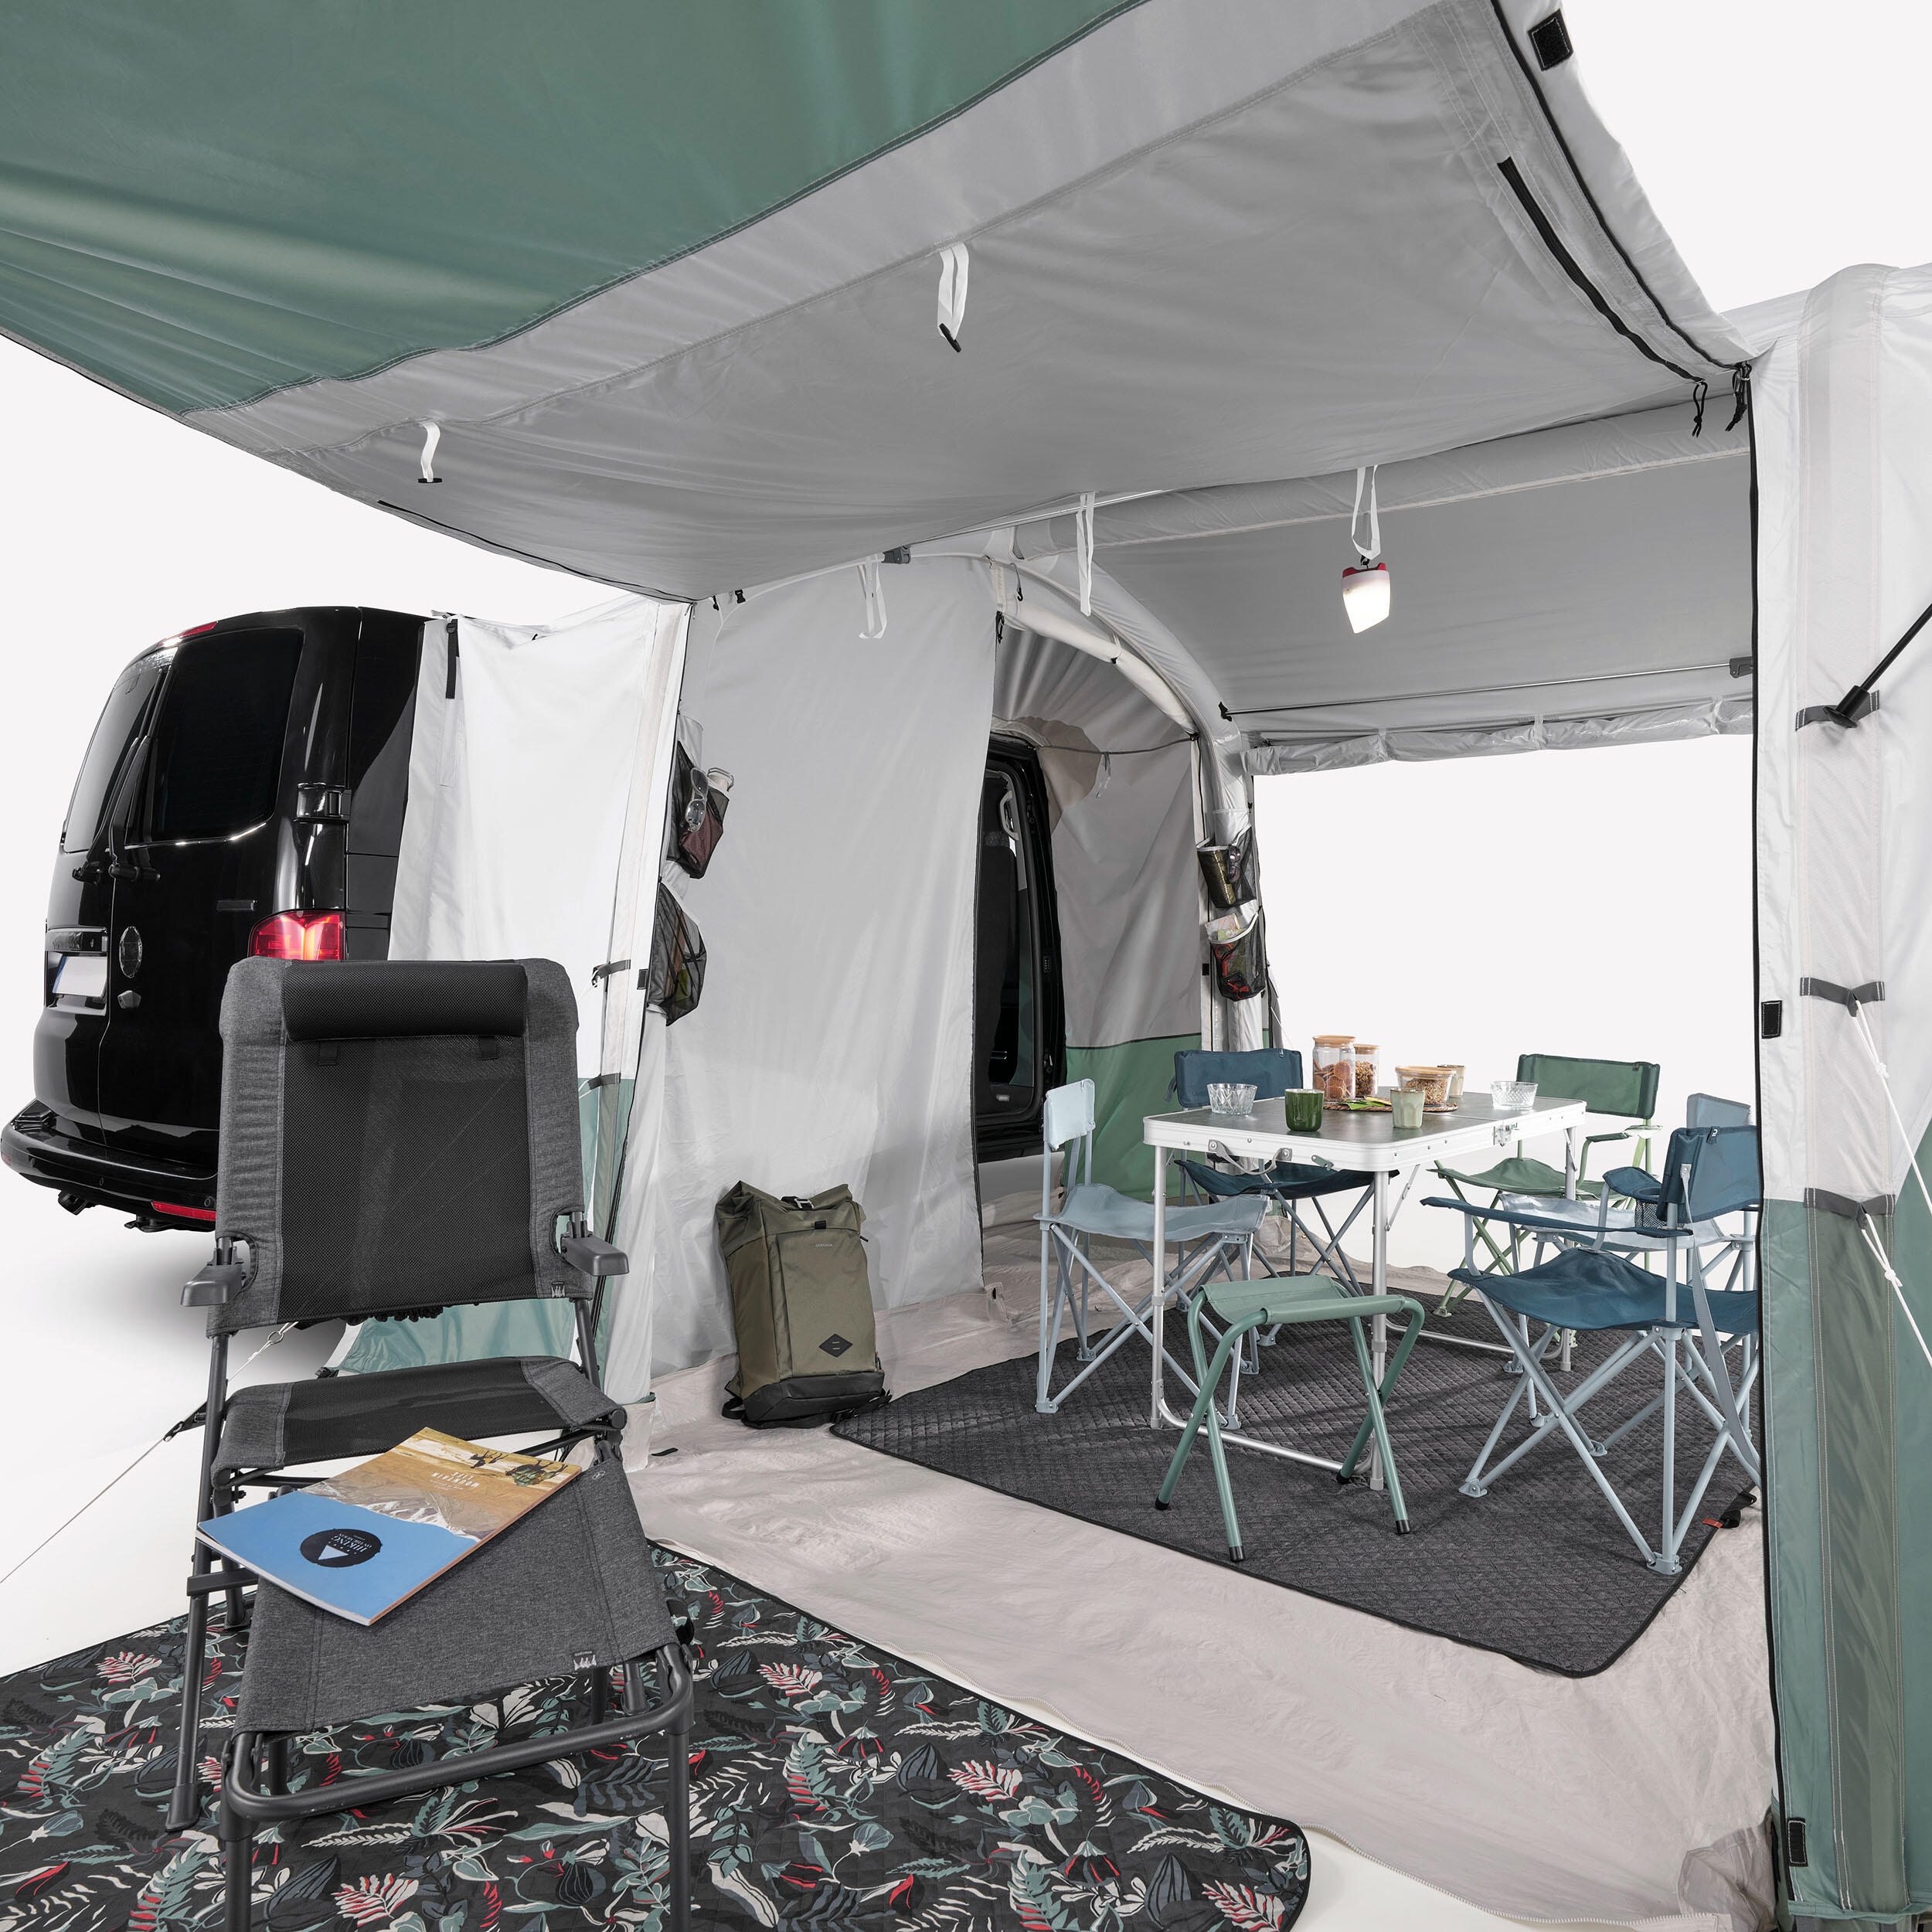 Van and truck inflatable canopy - Van Connect Air Seconds Fresh - 6 people 4/15